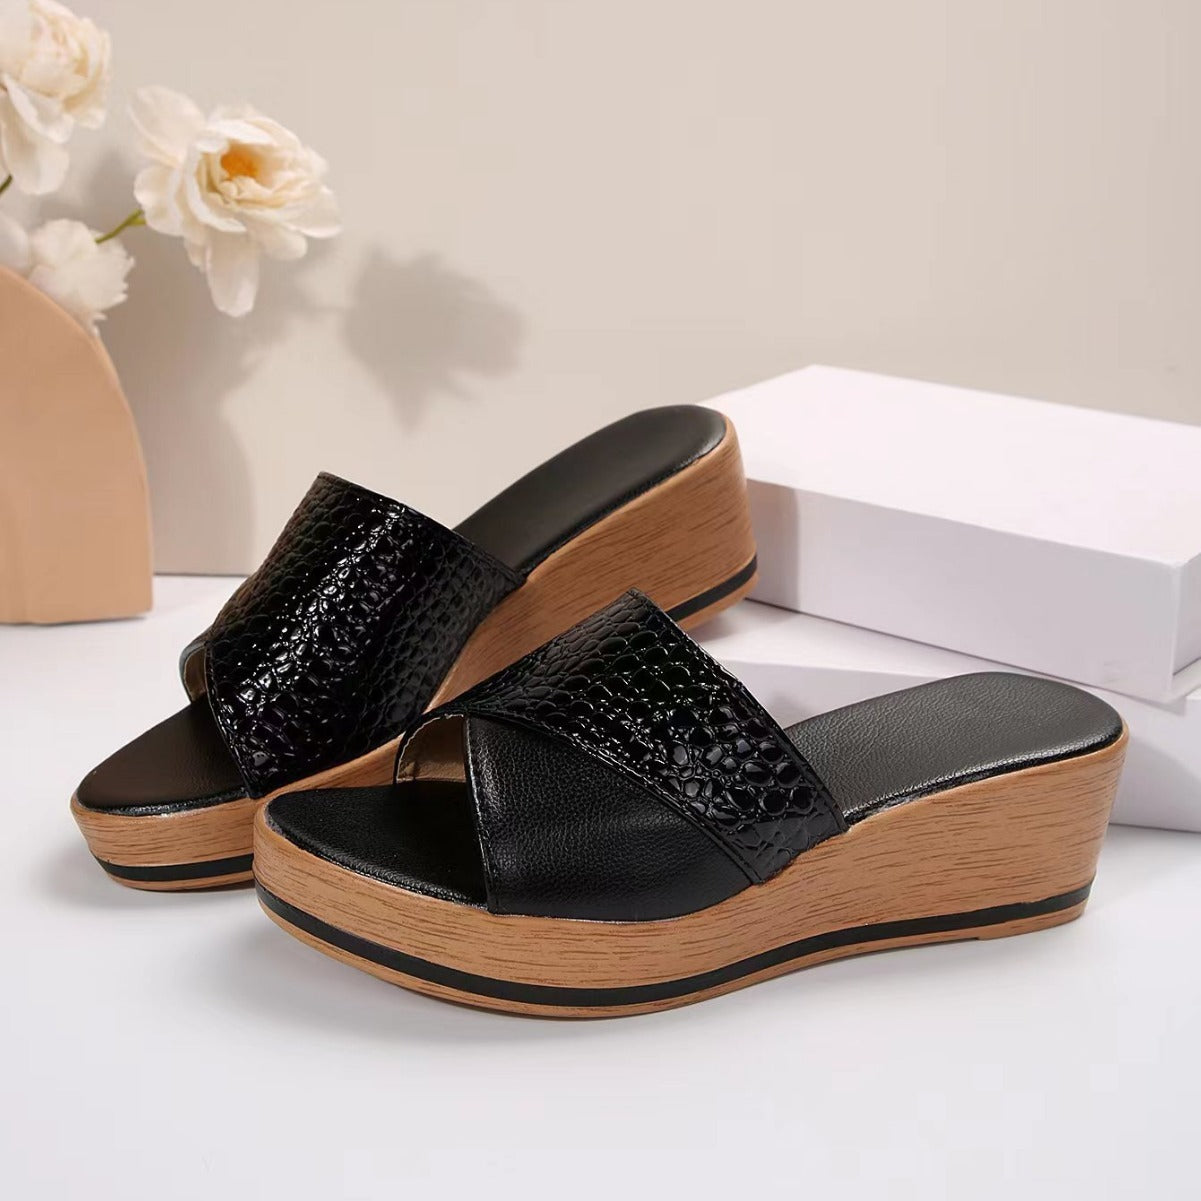 Fashion Snake-texture Wedges Sandals Summer Casual Peep-toe Thick Sole Heightening Slippers Outdoor Slides Shoes Women